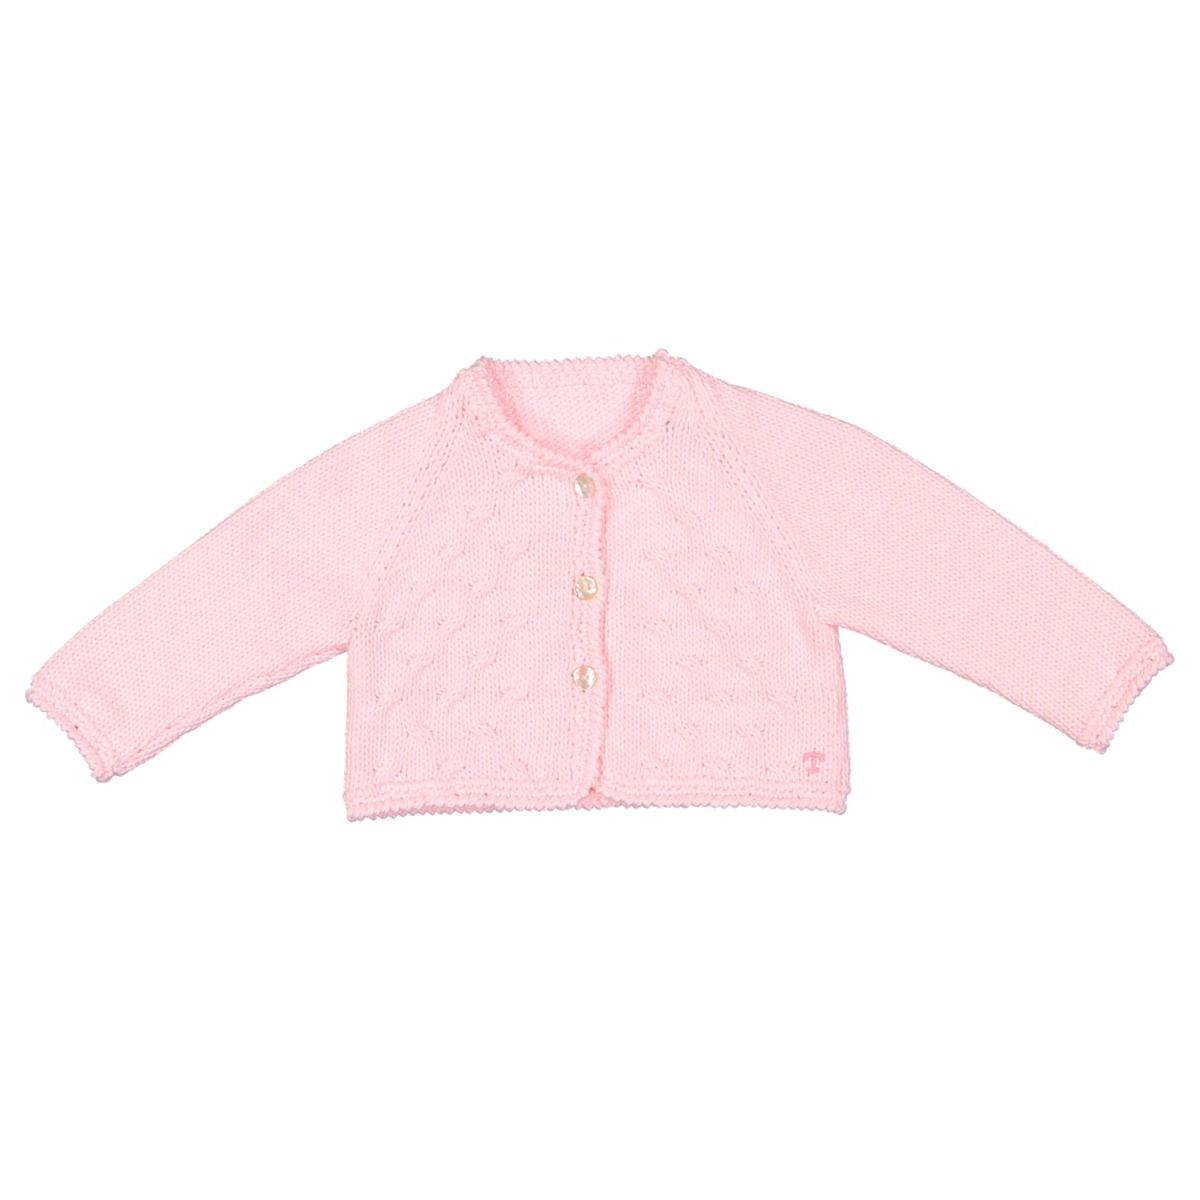 The hands of our artisans bring to life the most delicate and soft organic cotton yarn and create a real piece of art that becomes part of the family’s heirlooms. The lovely hand-knitted cardigan specially designed for the most memorable moments of the fi